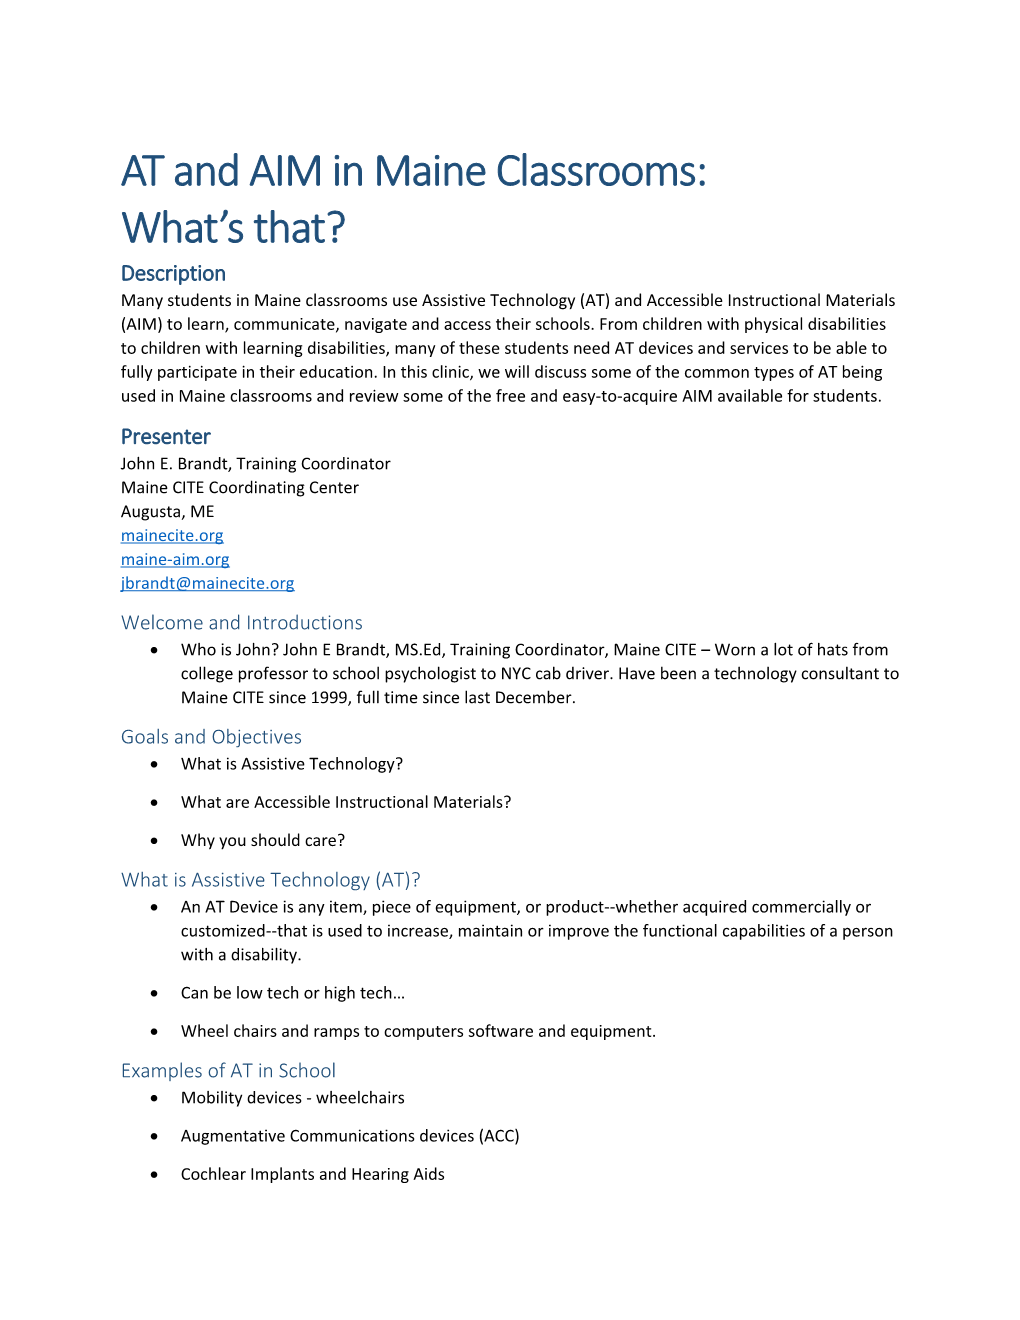 AT and AIM in Maine Classrooms: What S That?